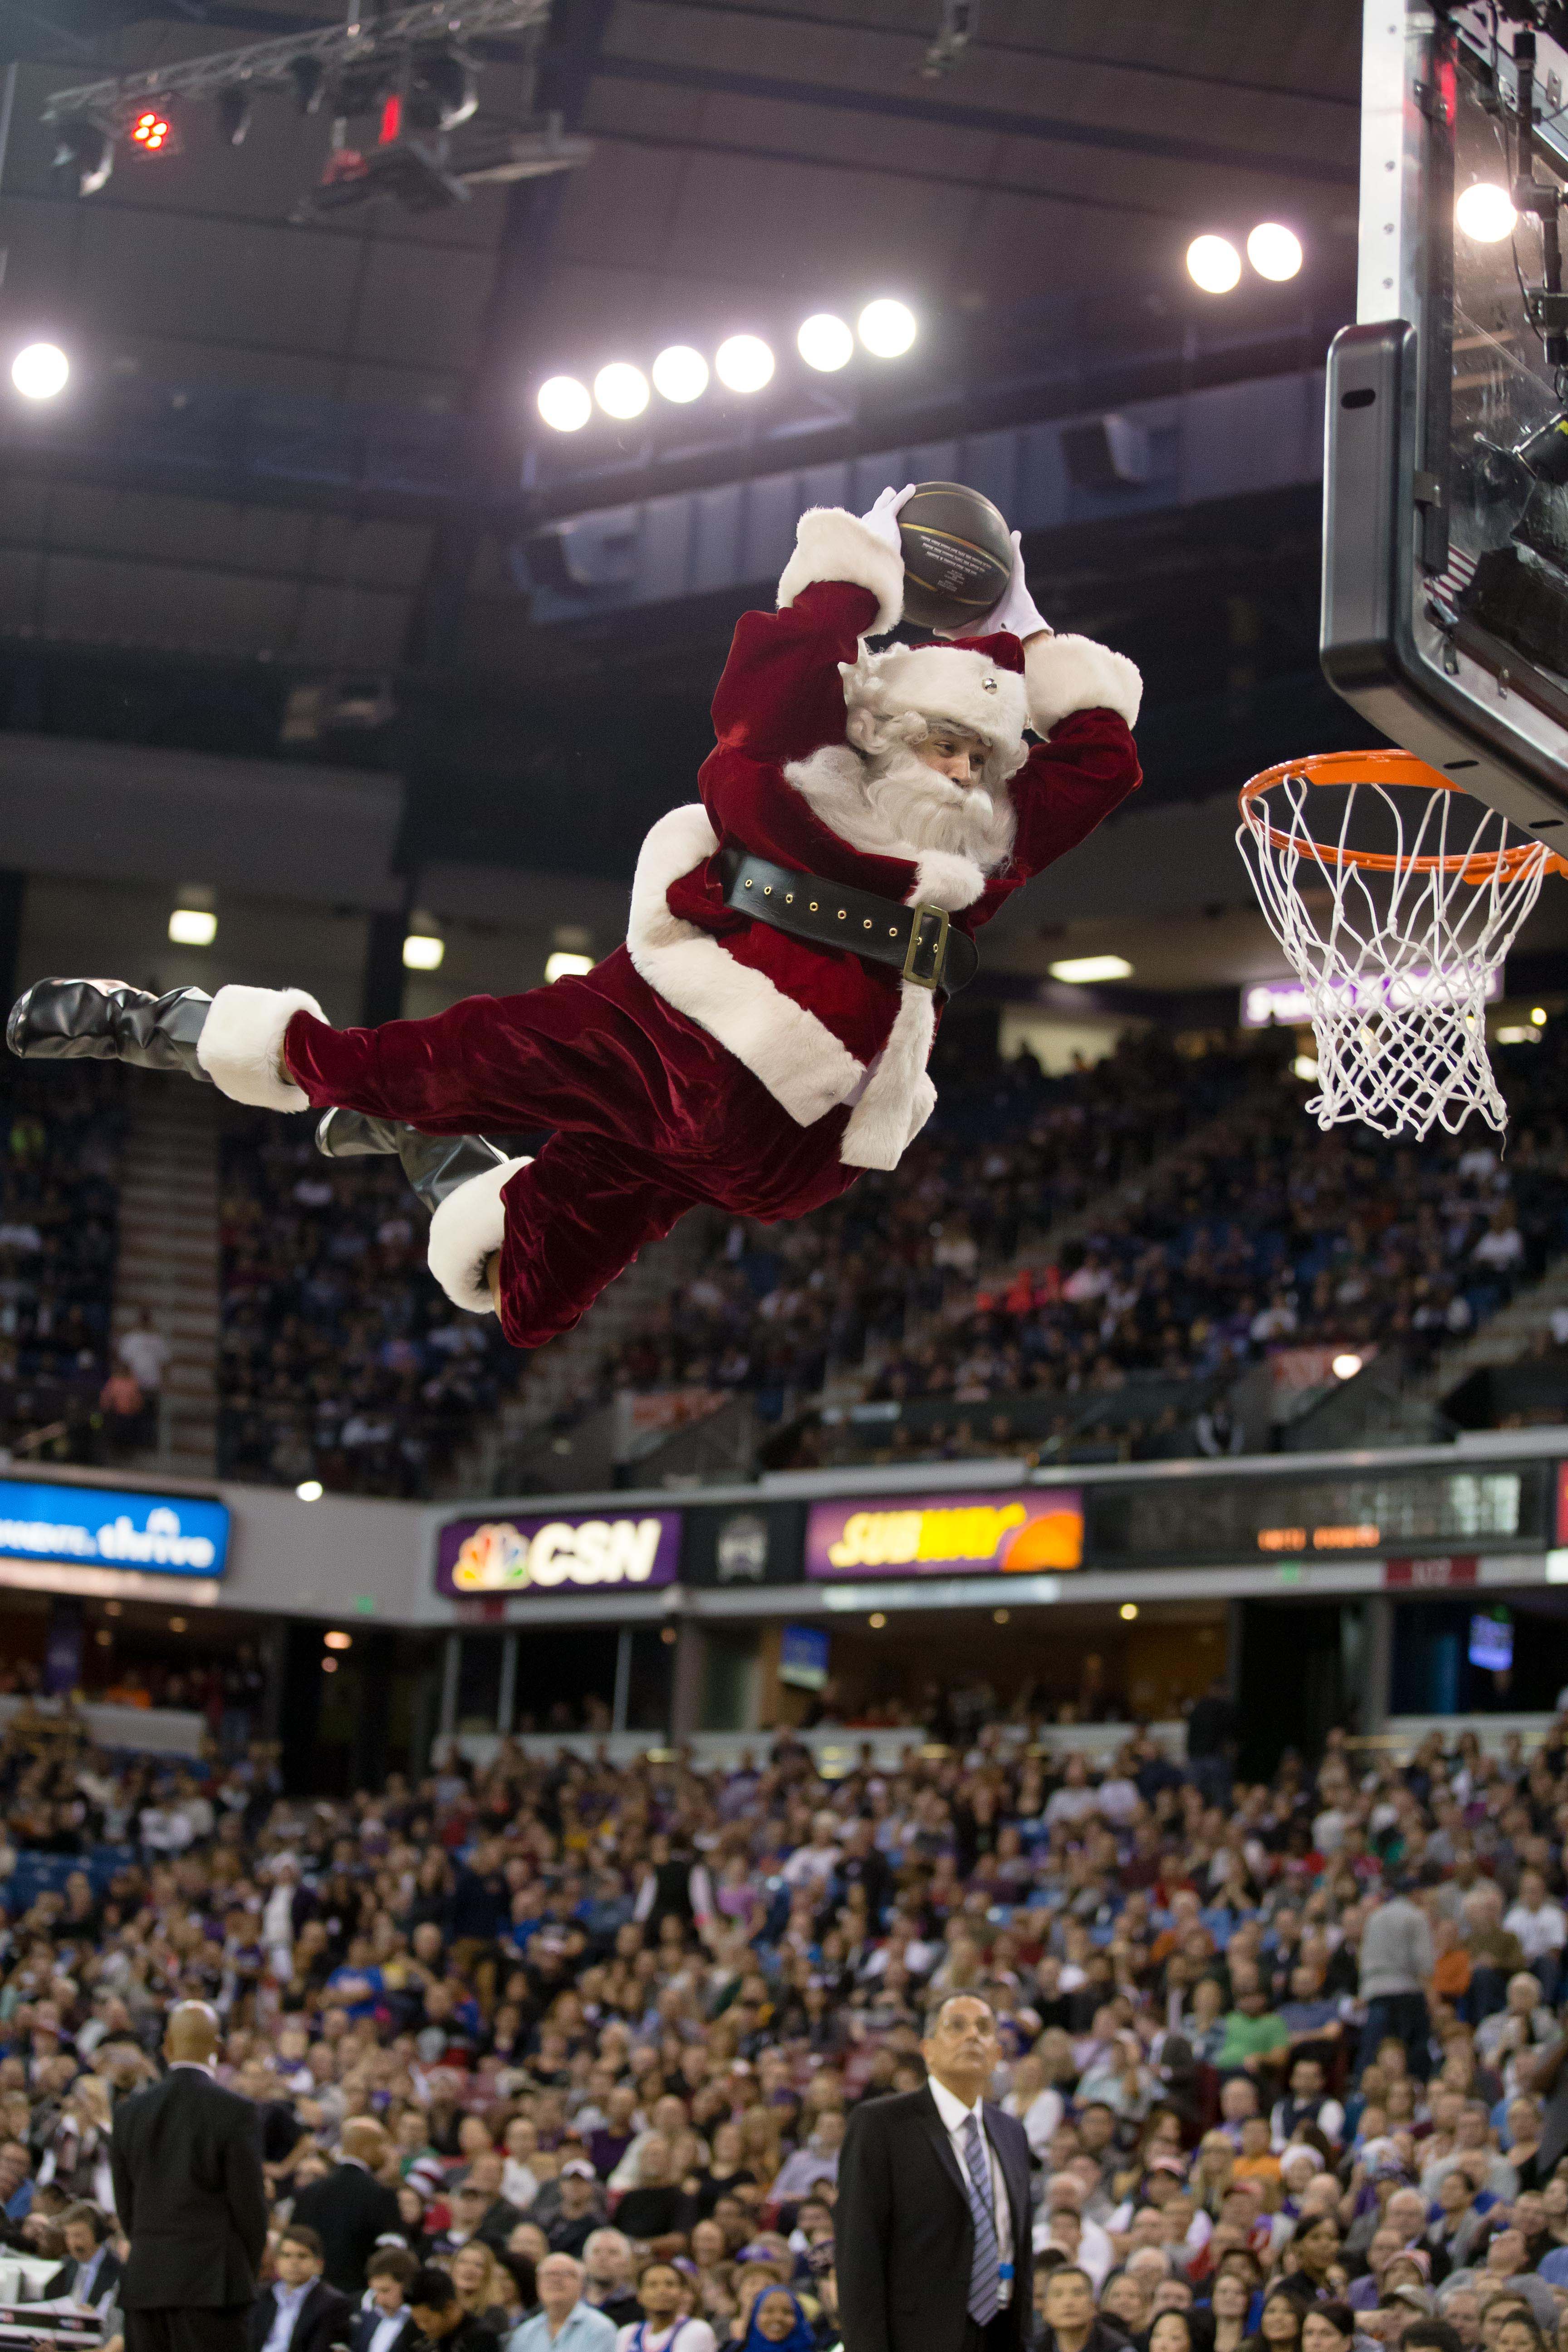 What to Get Your Favorite NBA Player for Christmas